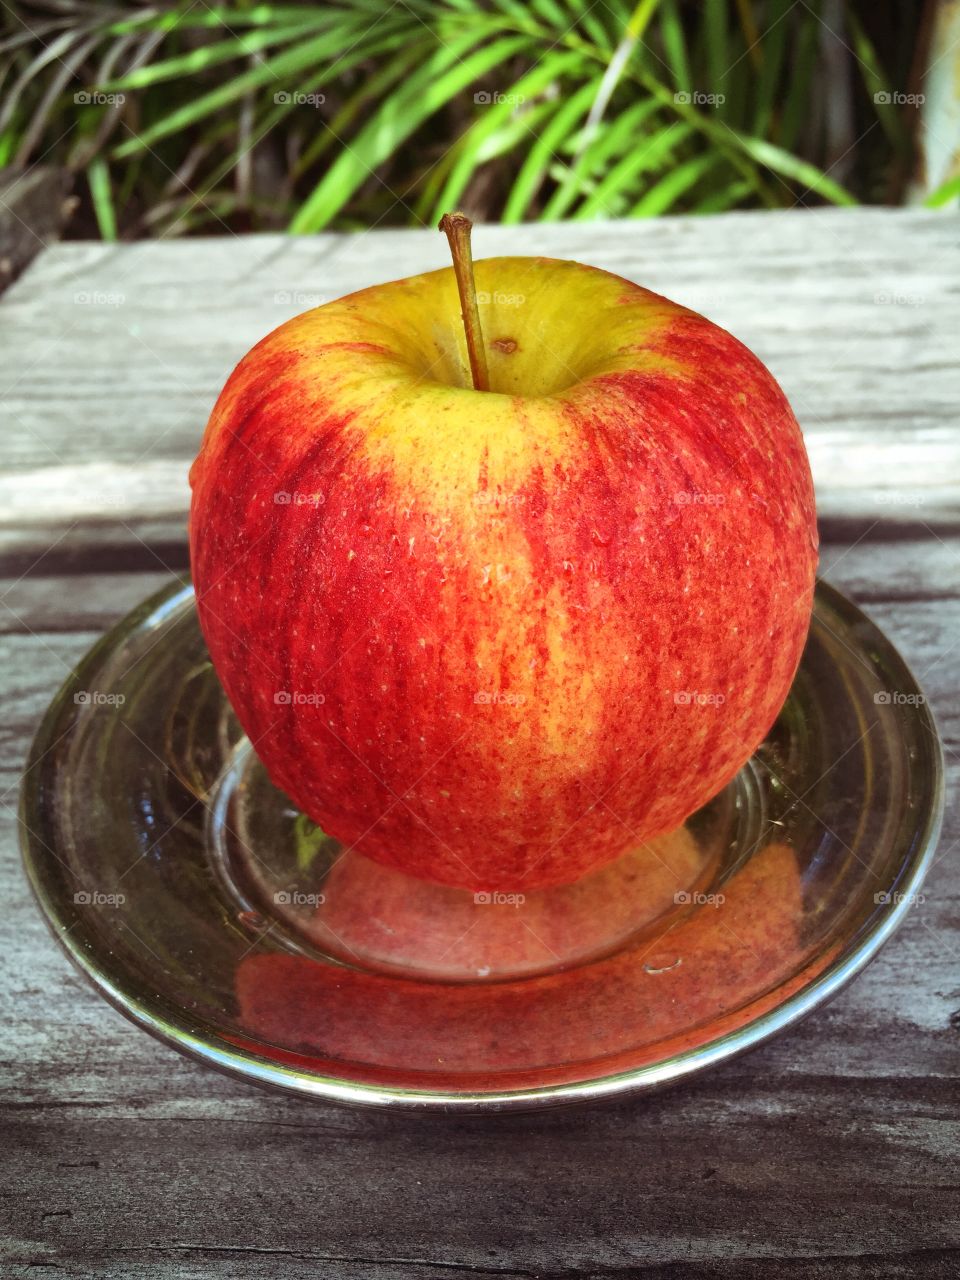 APPLE ON A SILVER PLATE